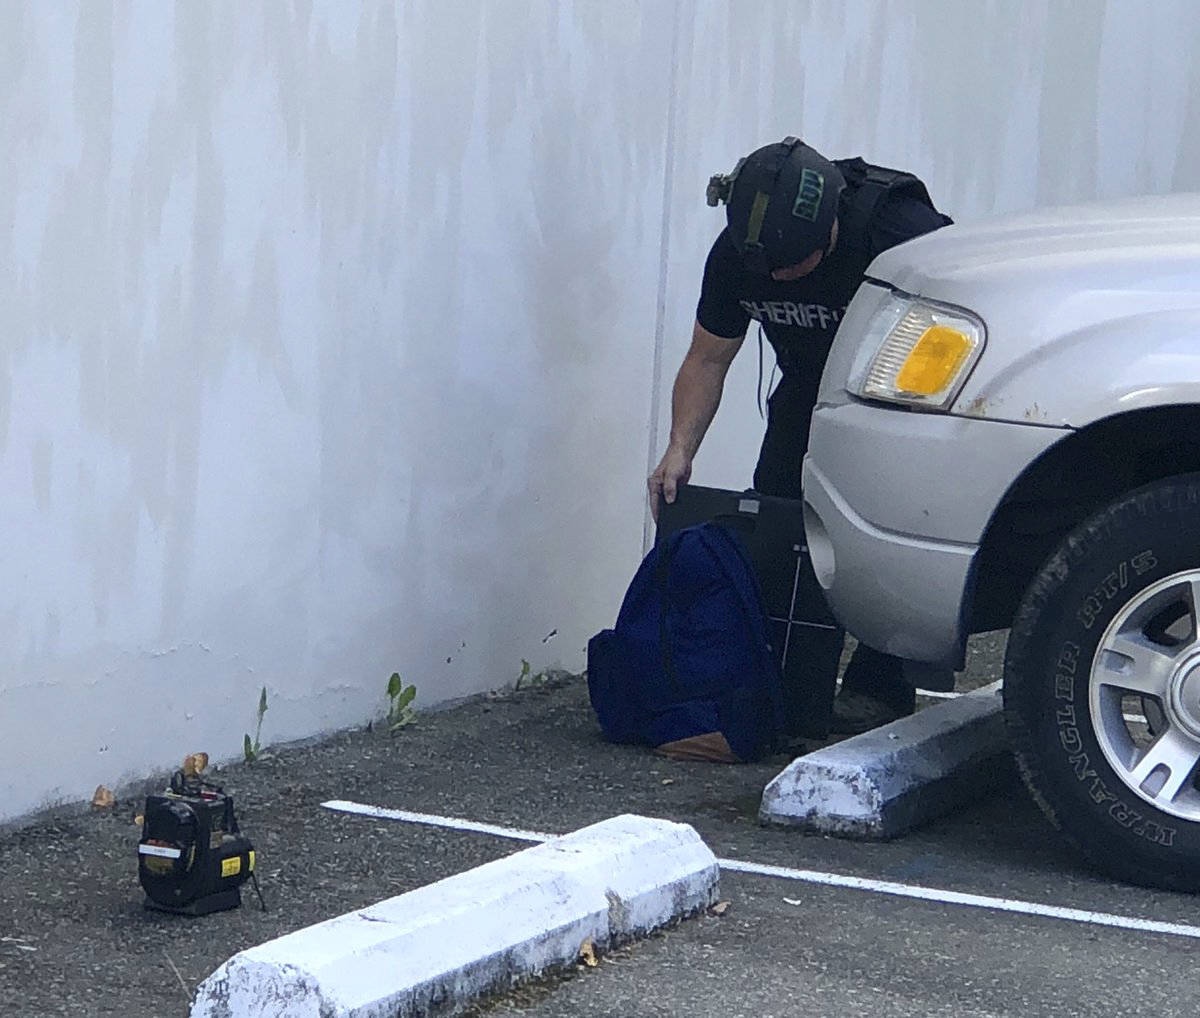 A member of King County Sheriff’s Office’s bomb disposal unit X-rays a suspicious package. Photo courtesy of Bothell Police Department